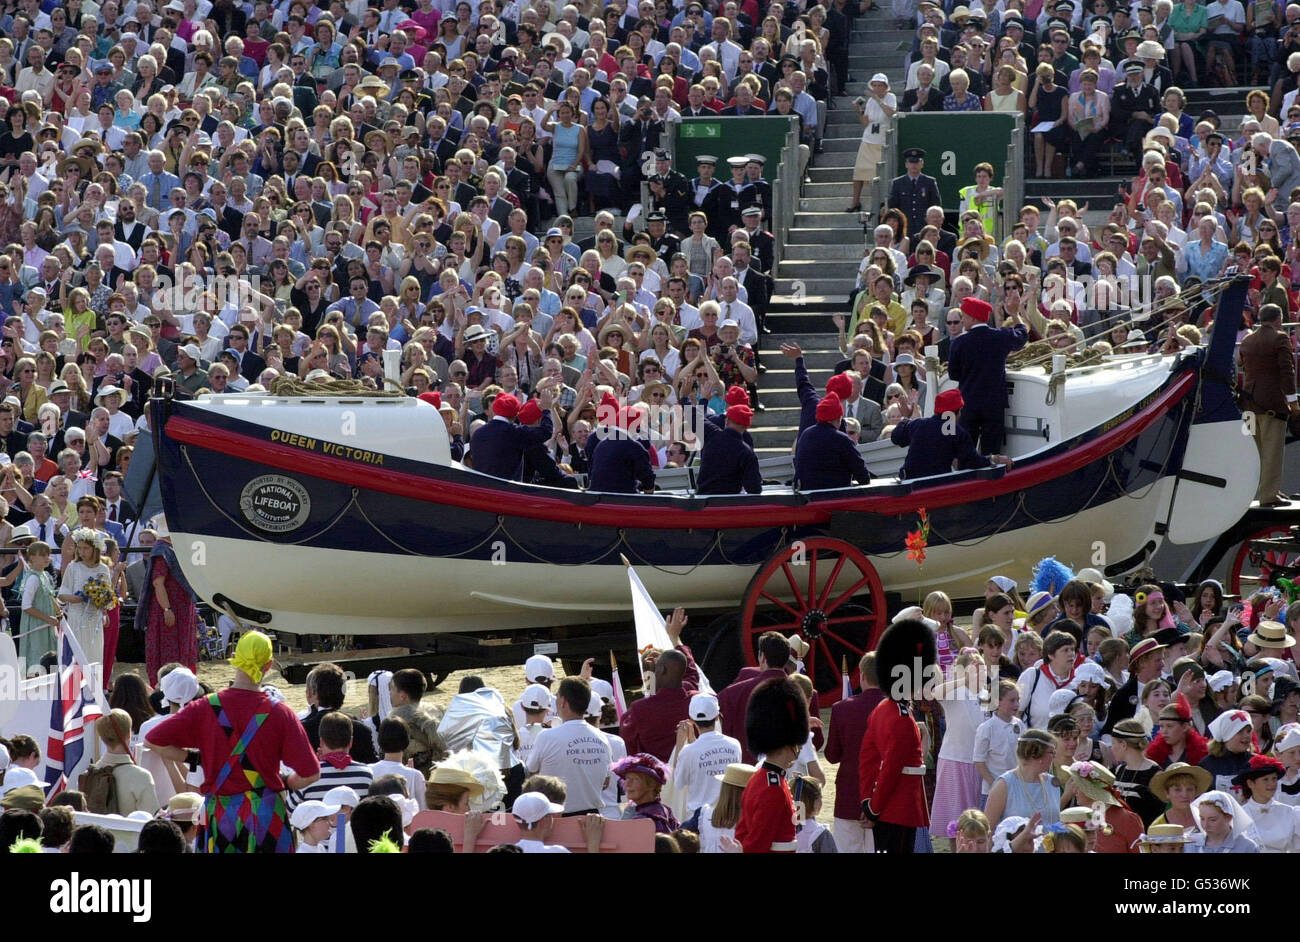 A float from the National Lifeboat Association during a pageant for the Queen Mother on London's Horse Guards Parade to mark her 100th birthday. Some 1,000 people, animals and aircraft are taking part reflcting all parts of Britain's national life. Stock Photo